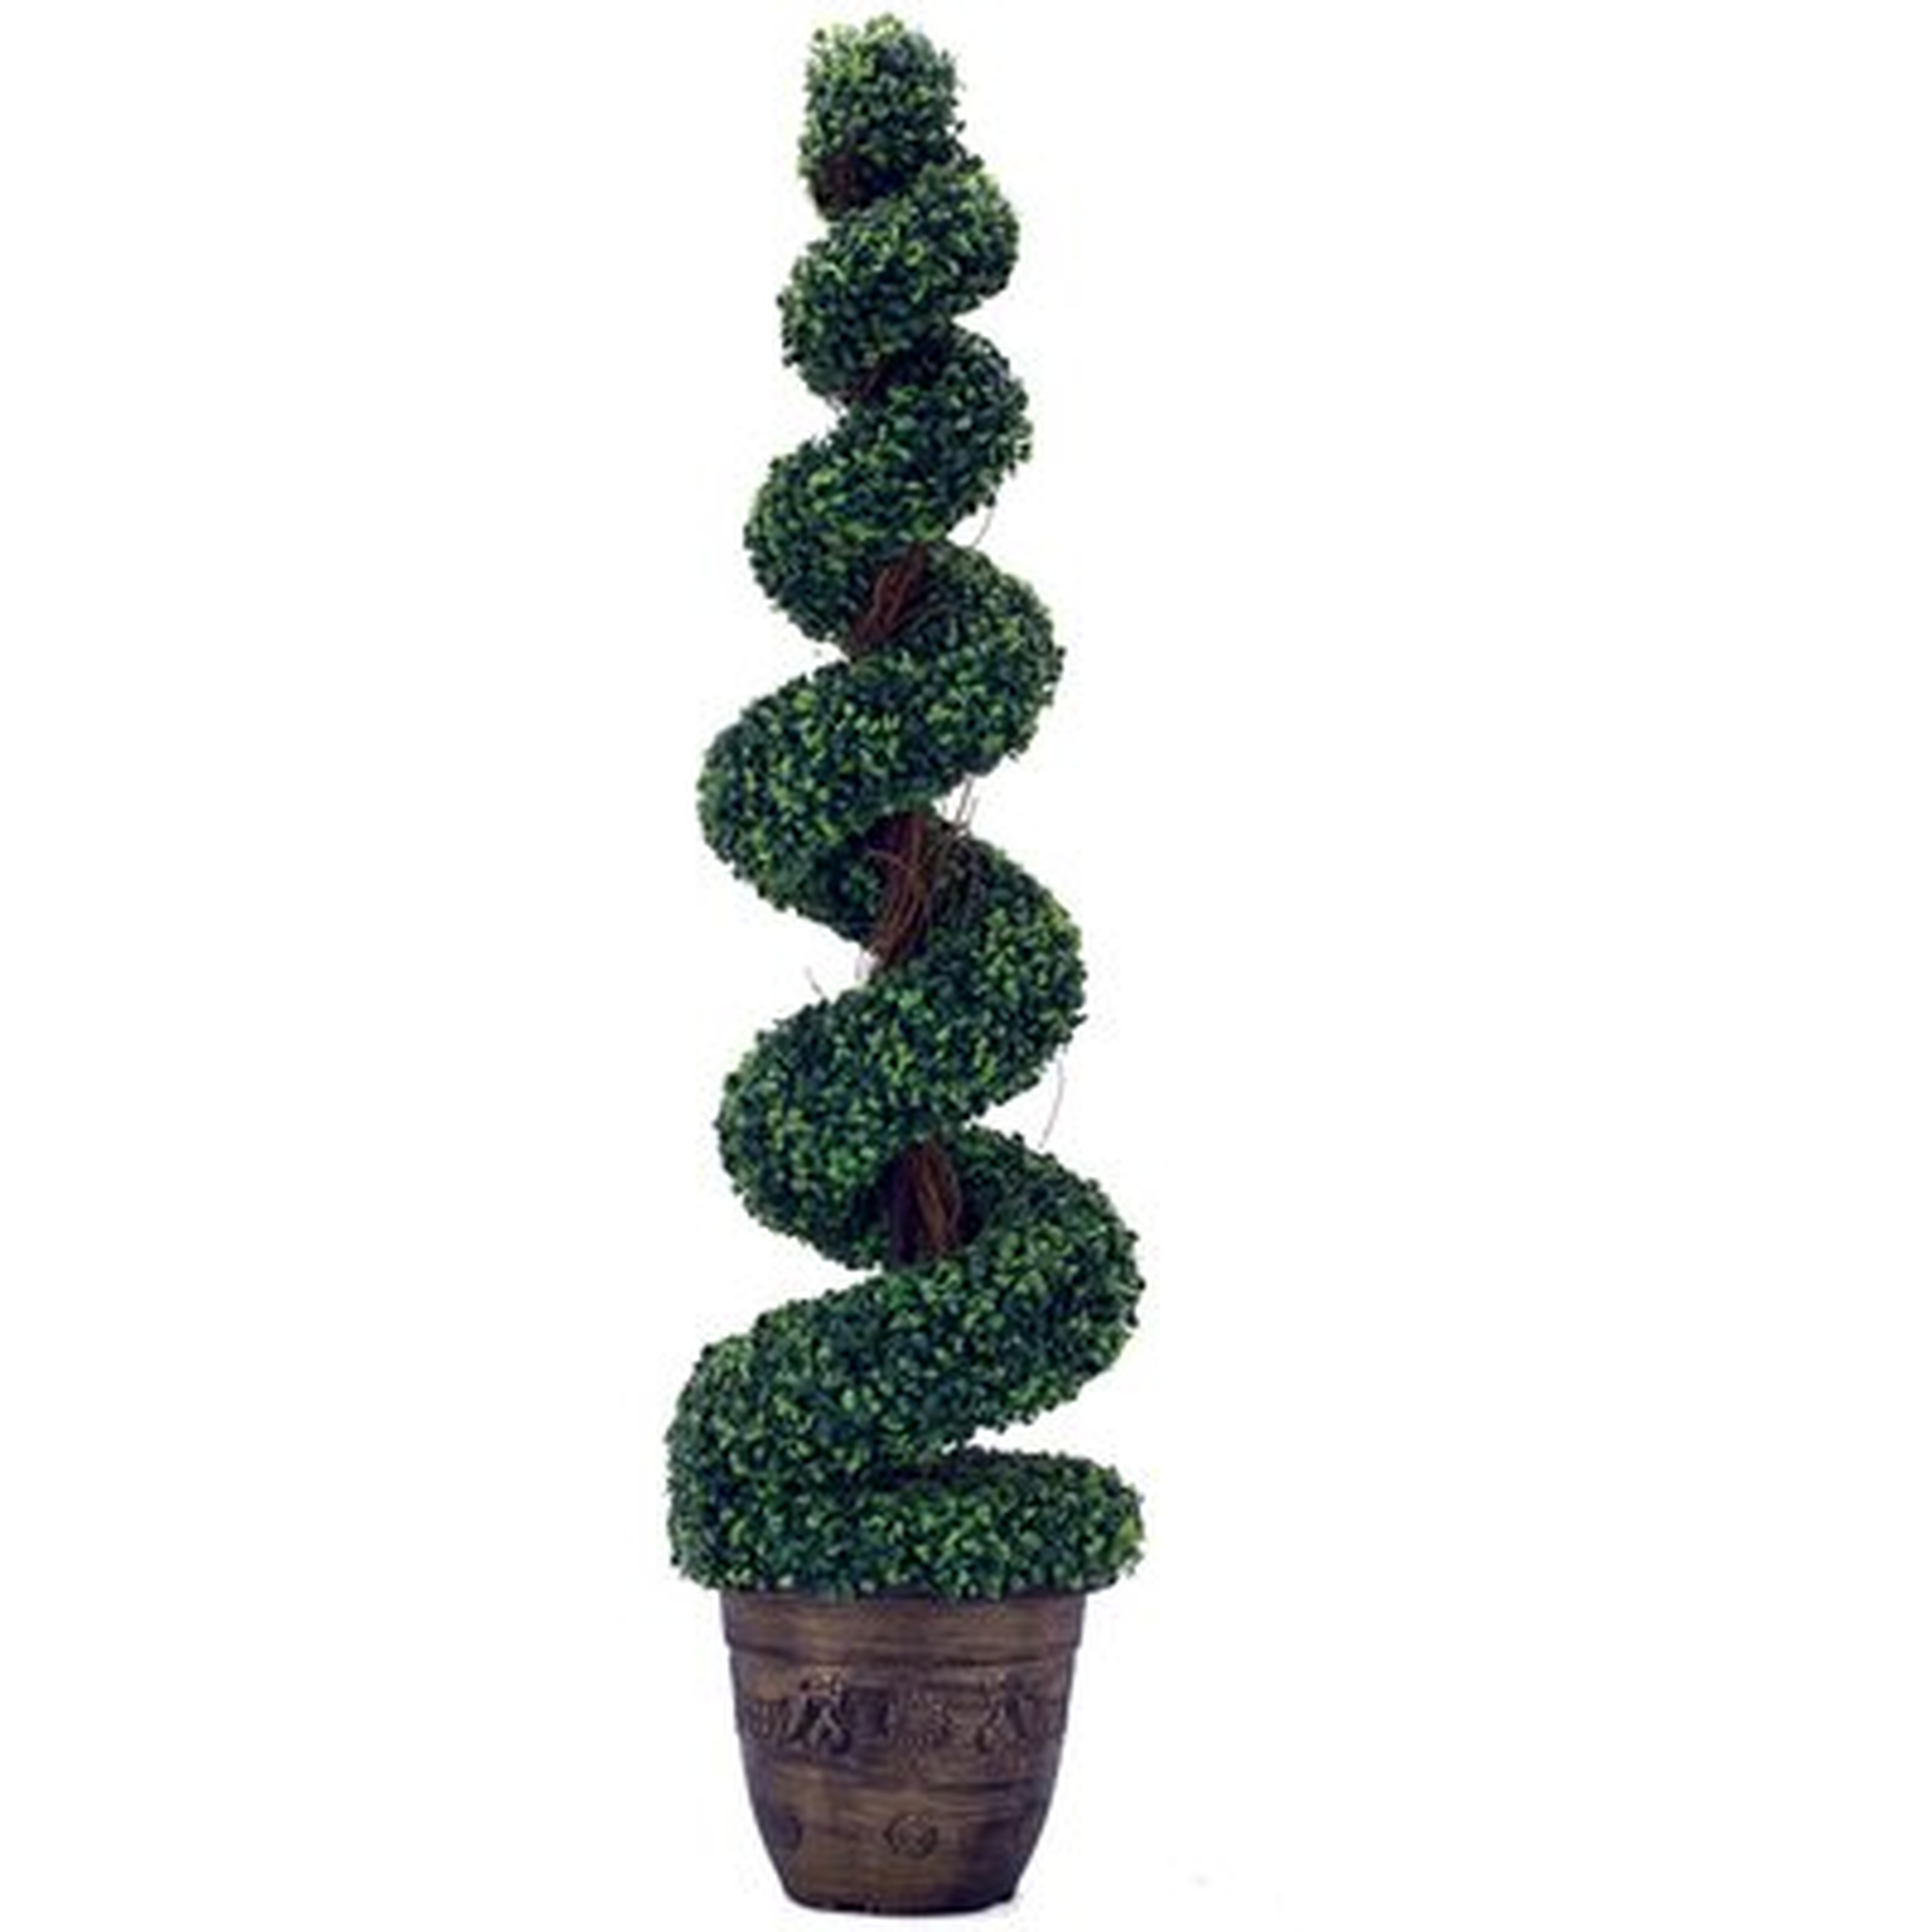 Artificial Tree Boxwood Topiary in Planter - Wayfair